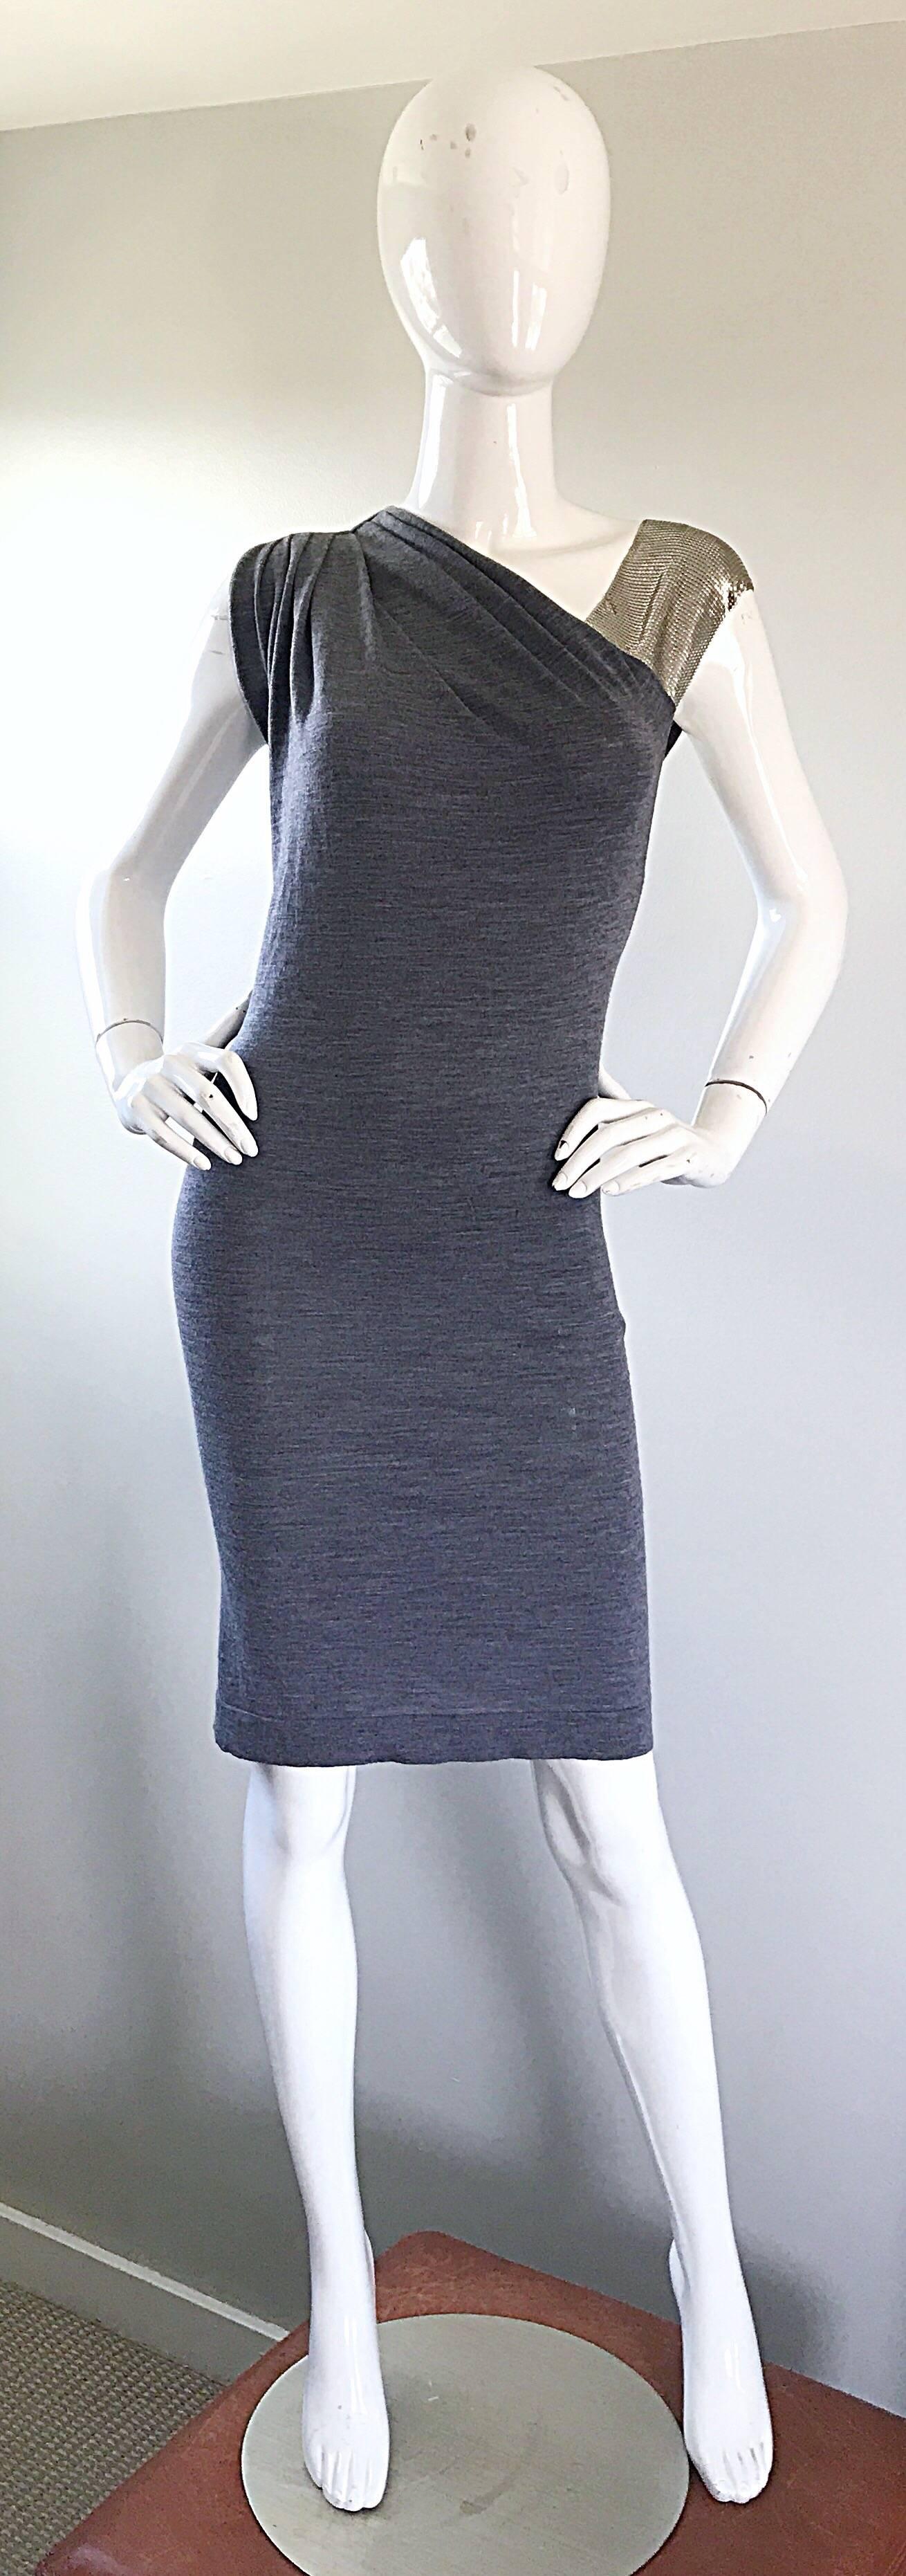 Brand new with tags early 2000s PIERRE BALMAIN gray wool and cashmere one shoulder chain mail cocktail dress! Features one shoulder of metal mesh chainmail, produced by Whiting & Davis. Super soft and luxurious wool and cashmere blend. Simply slips